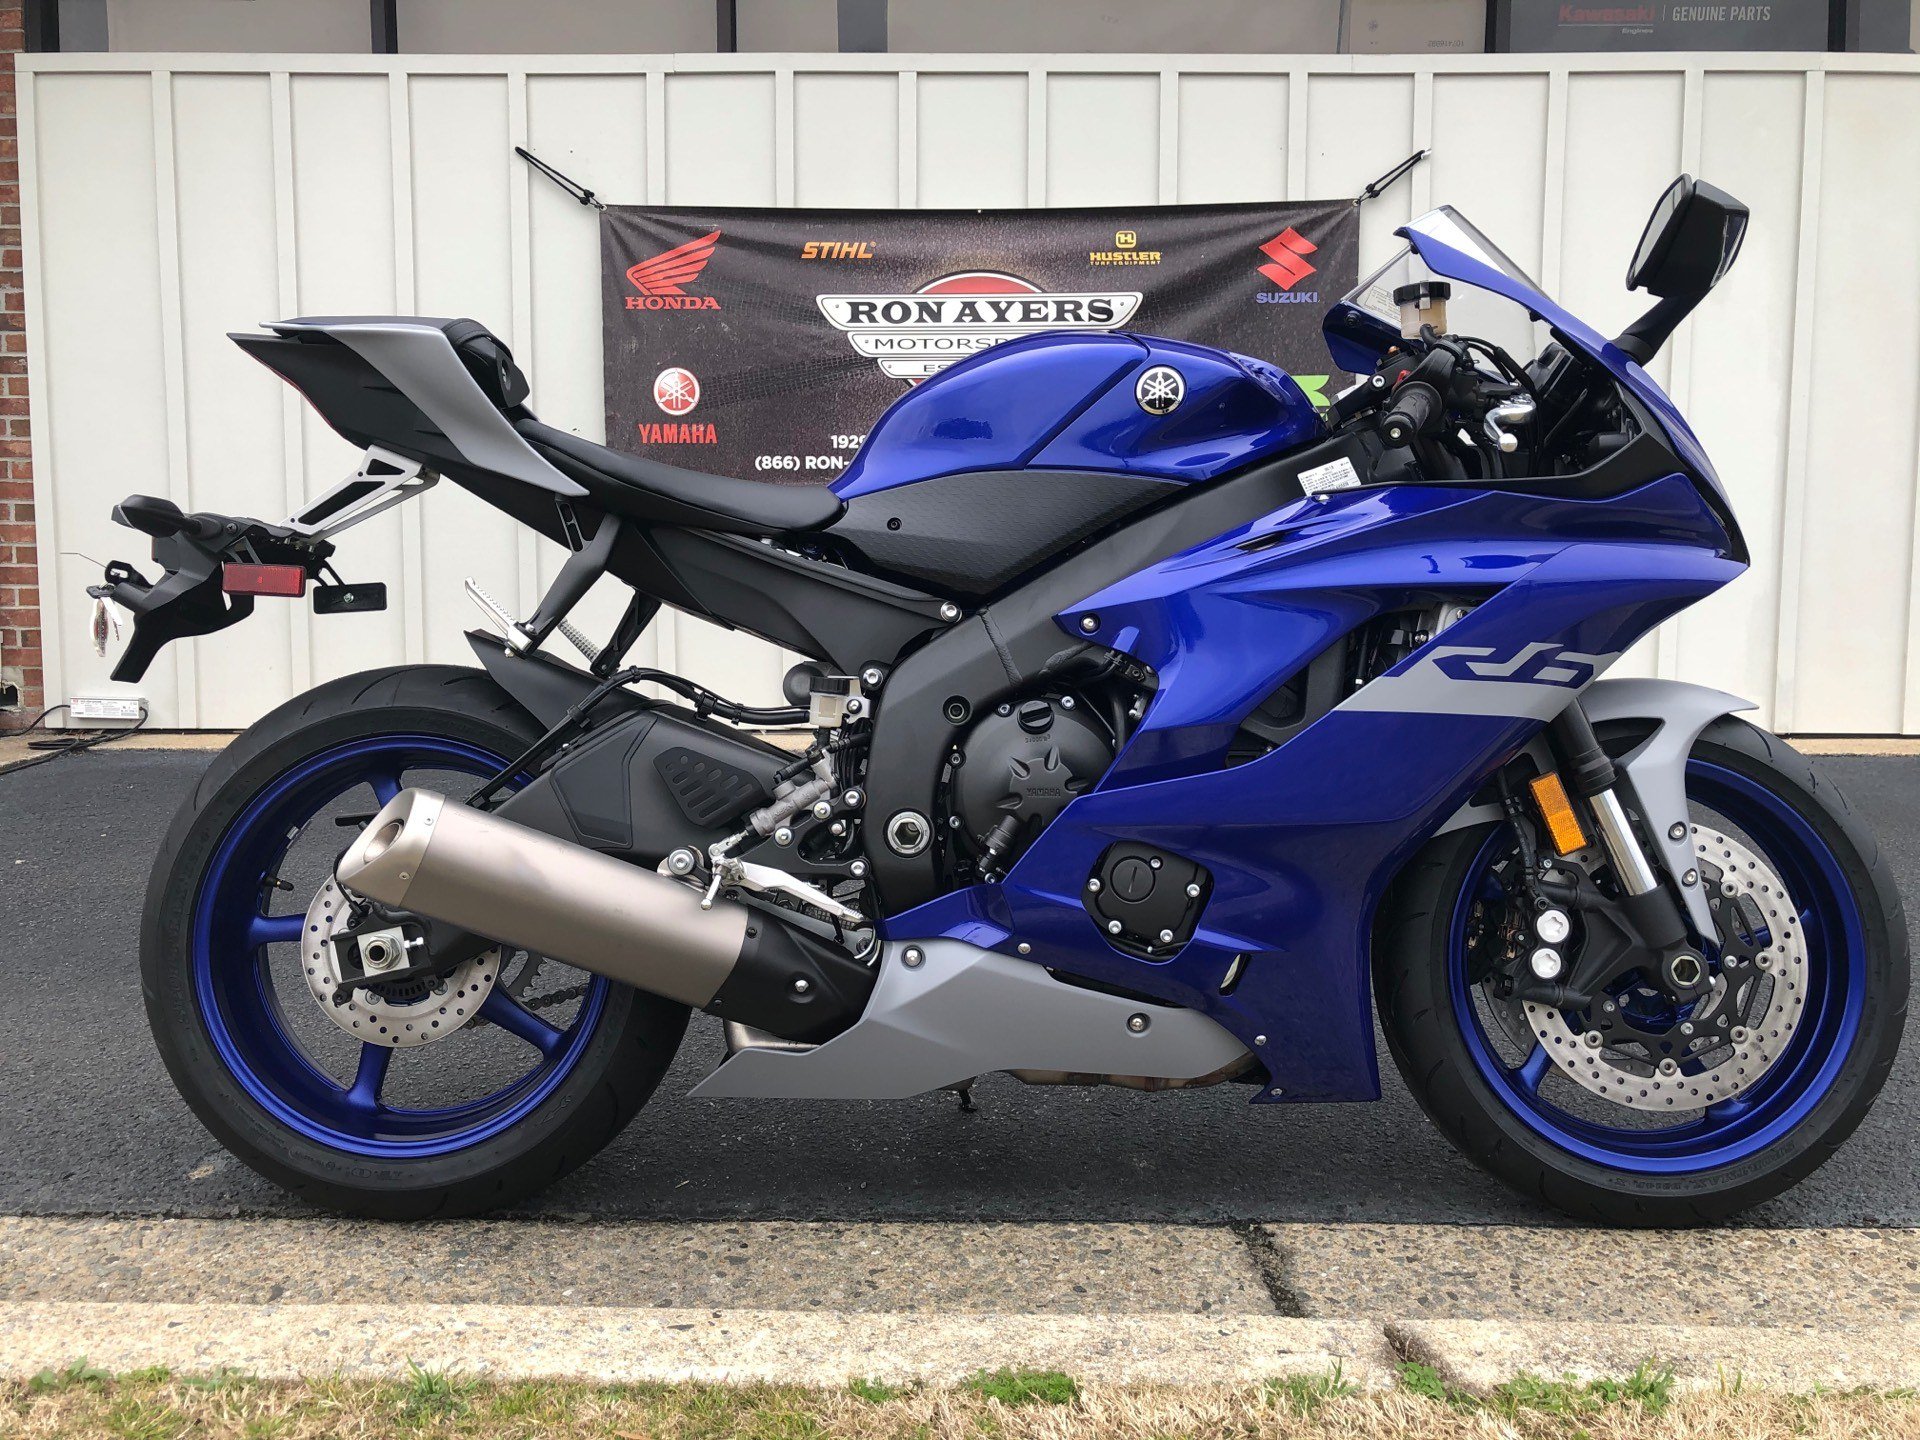 New Yamaha Yzf R6 Motorcycles In Greenville Nc Stock Number N A